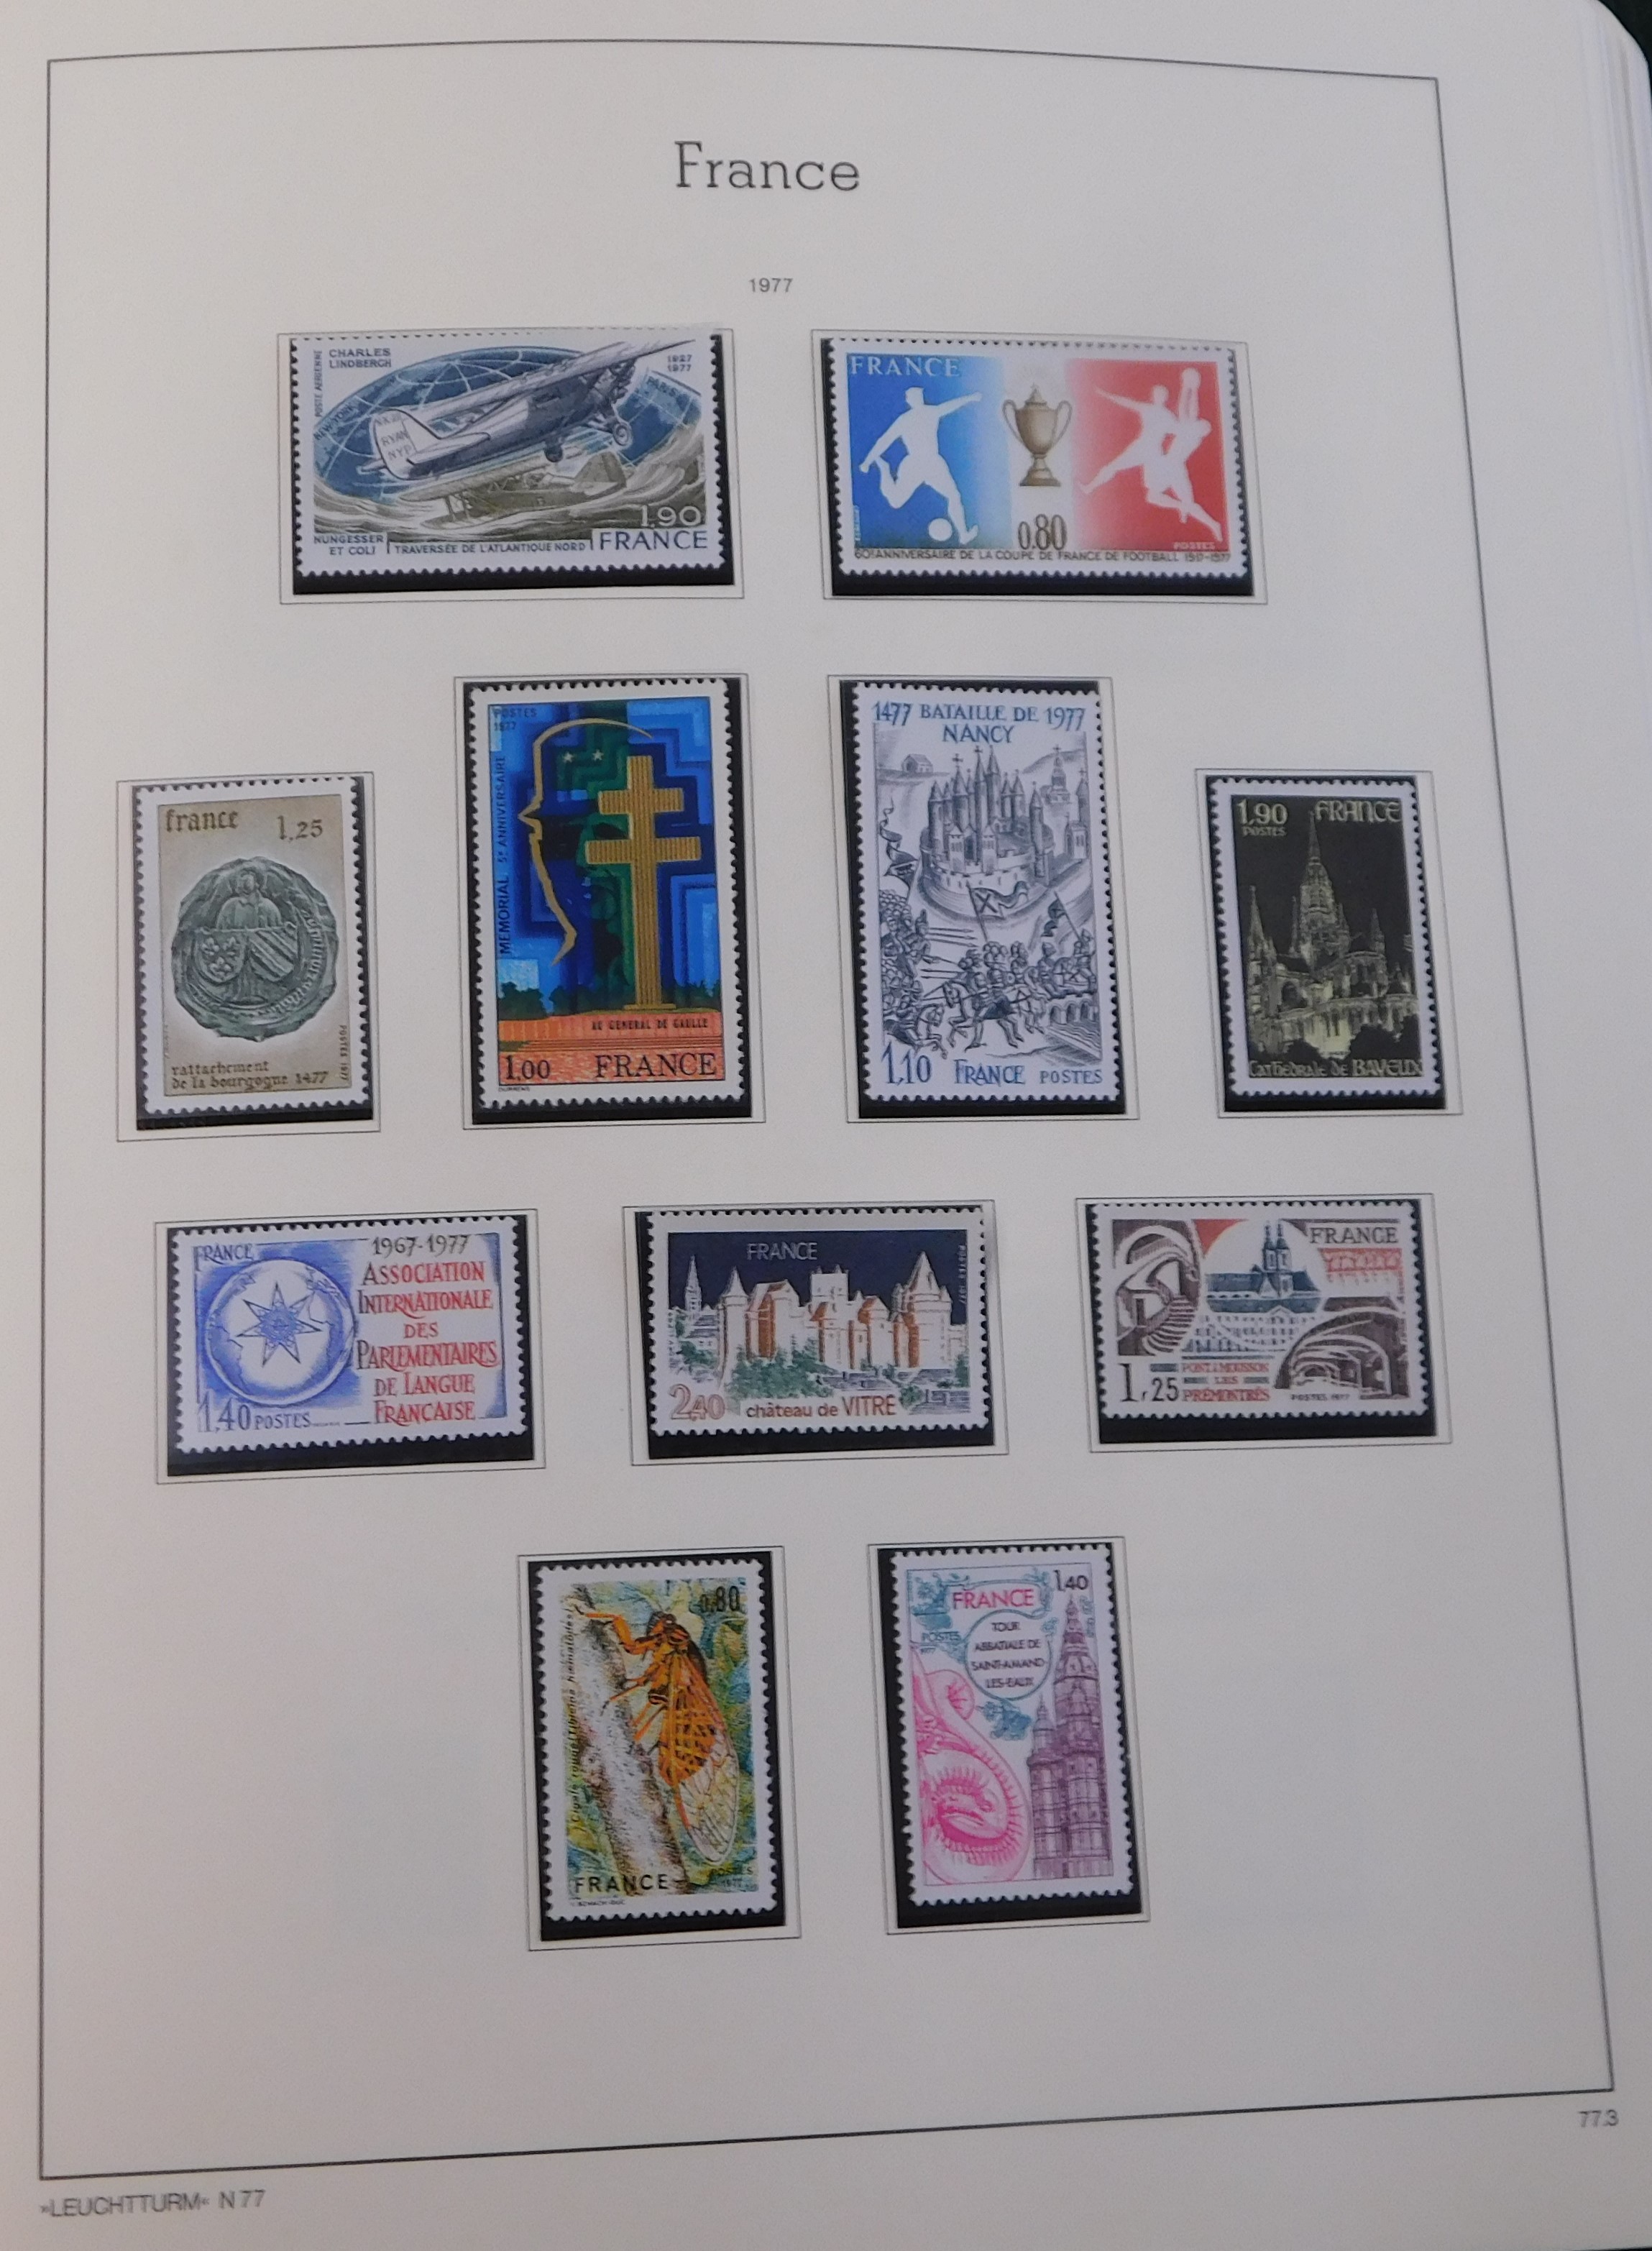 France 1975-1985 Leuchtturm album with mounted pages containing very nearly complete u/m issues - Image 3 of 6